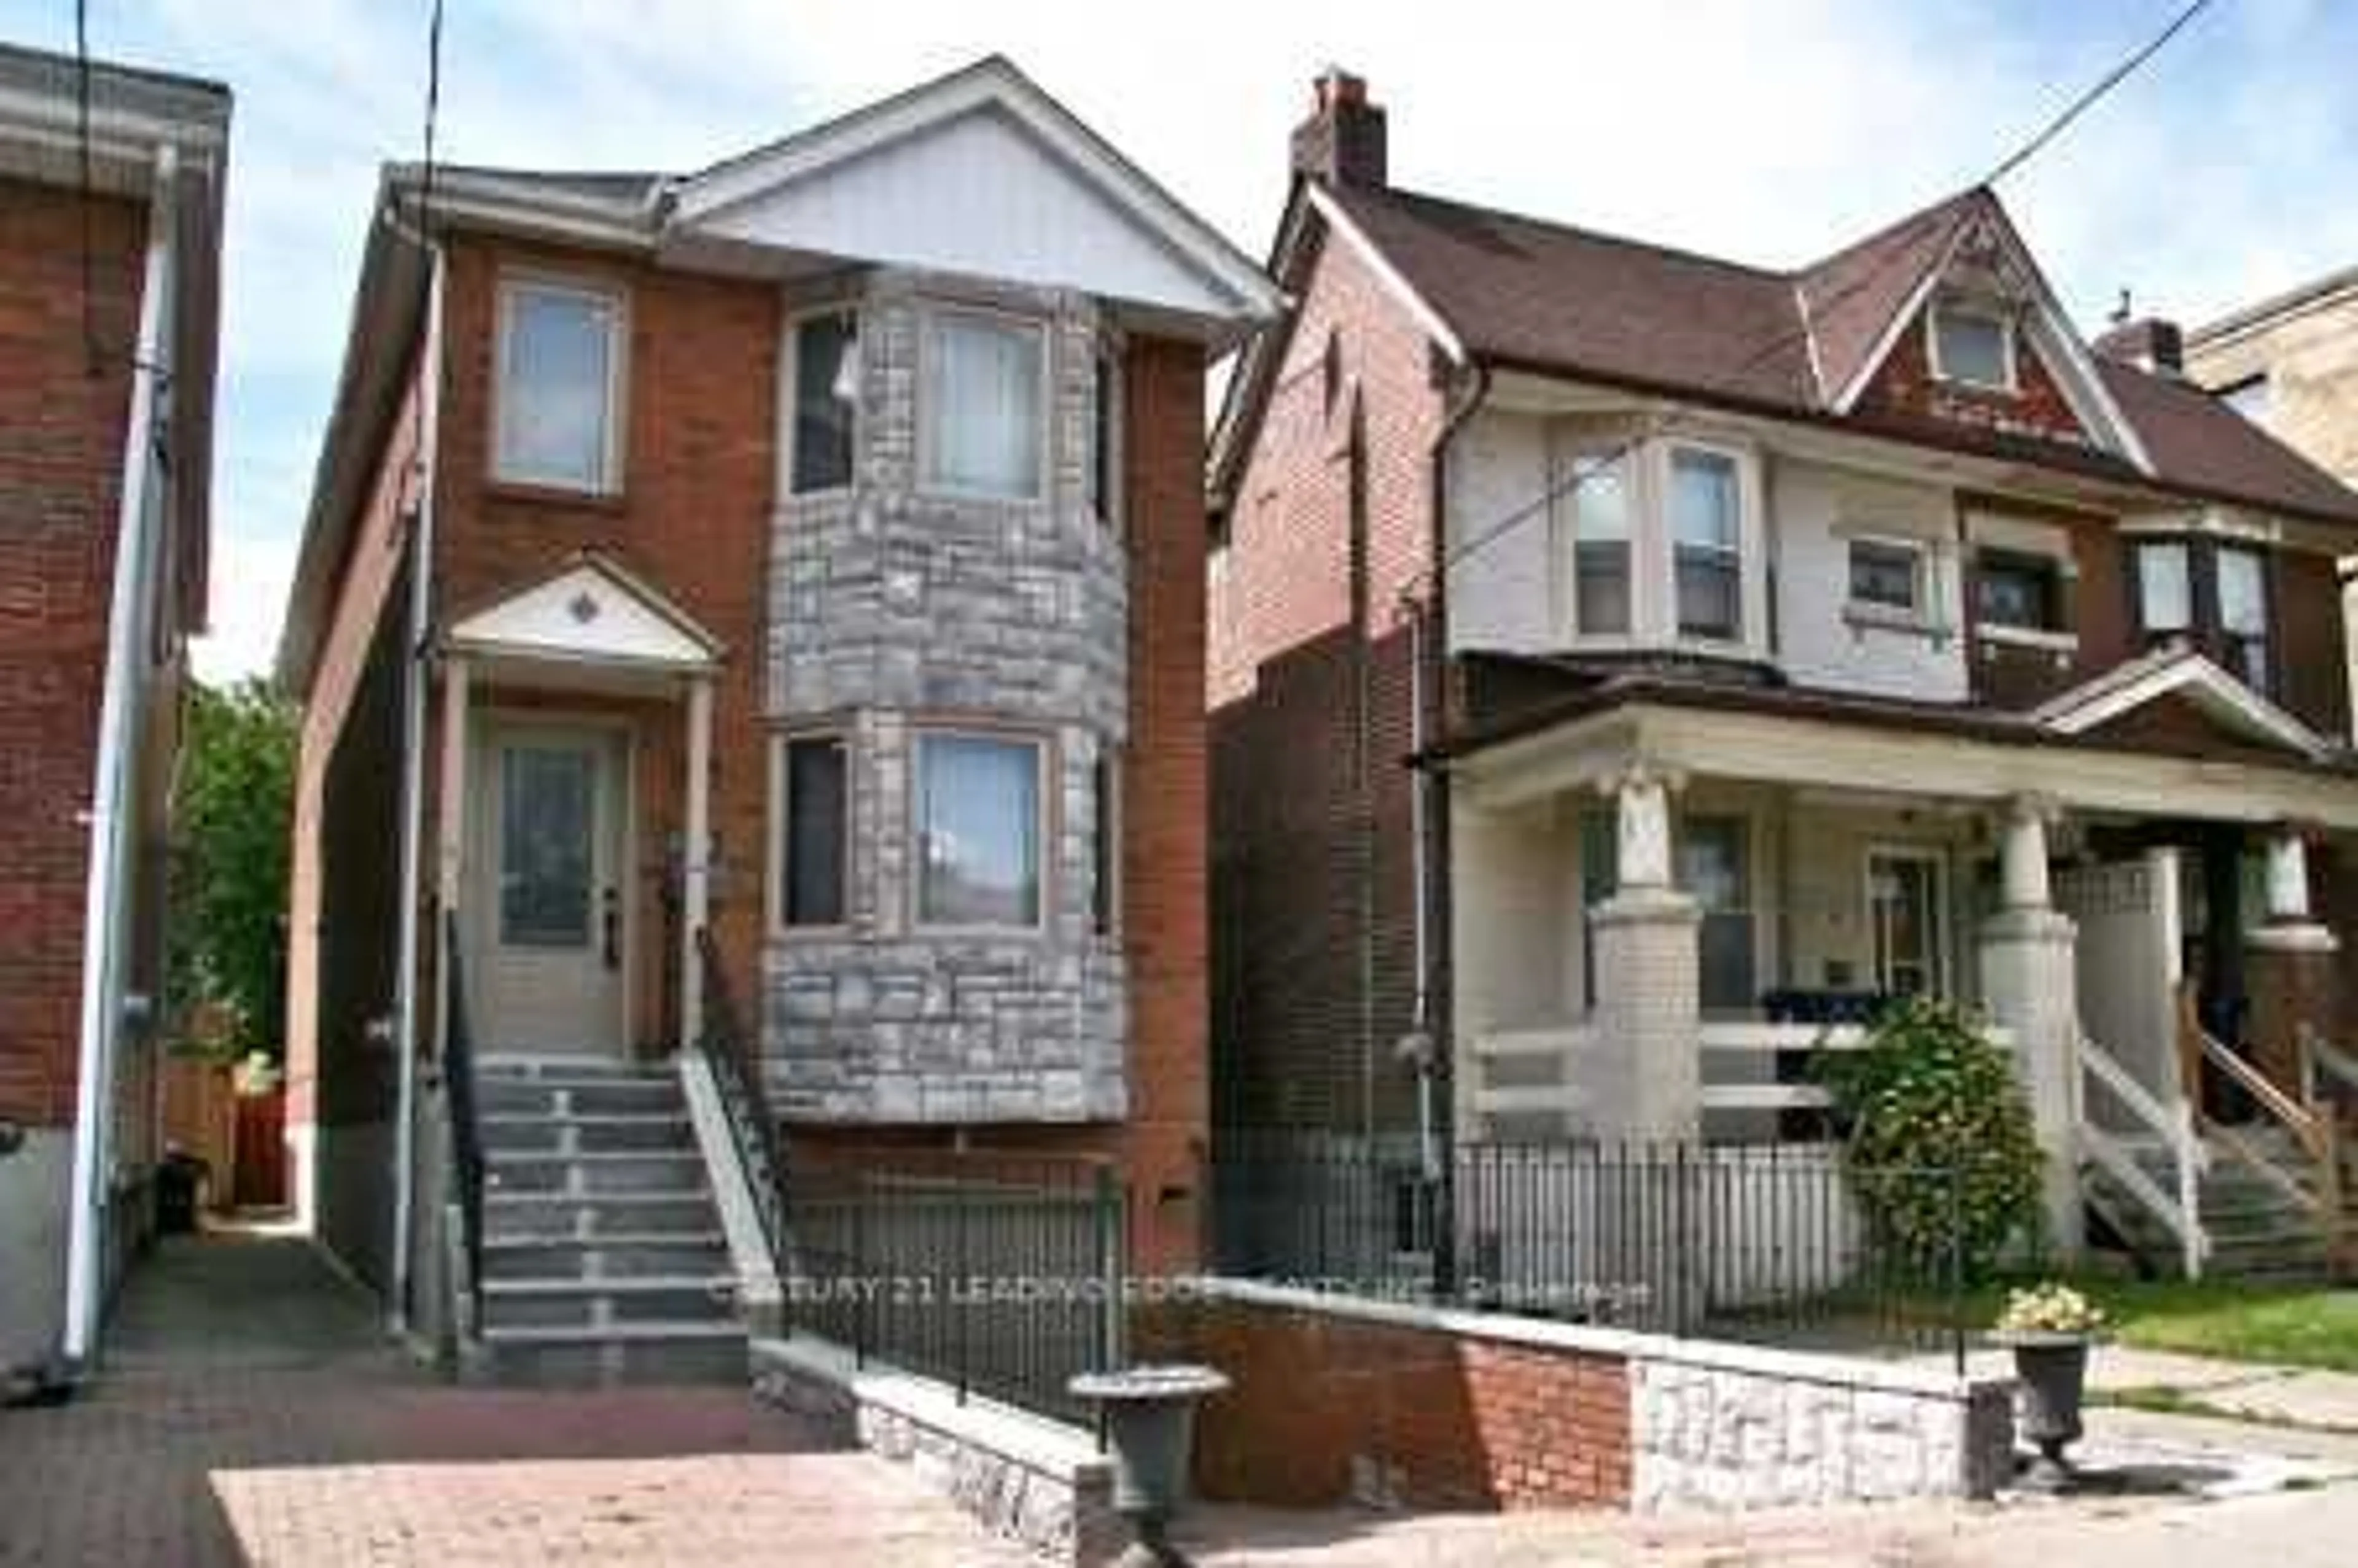 Home with brick exterior material for 143 Gamble Ave, Toronto Ontario M4J 2P2